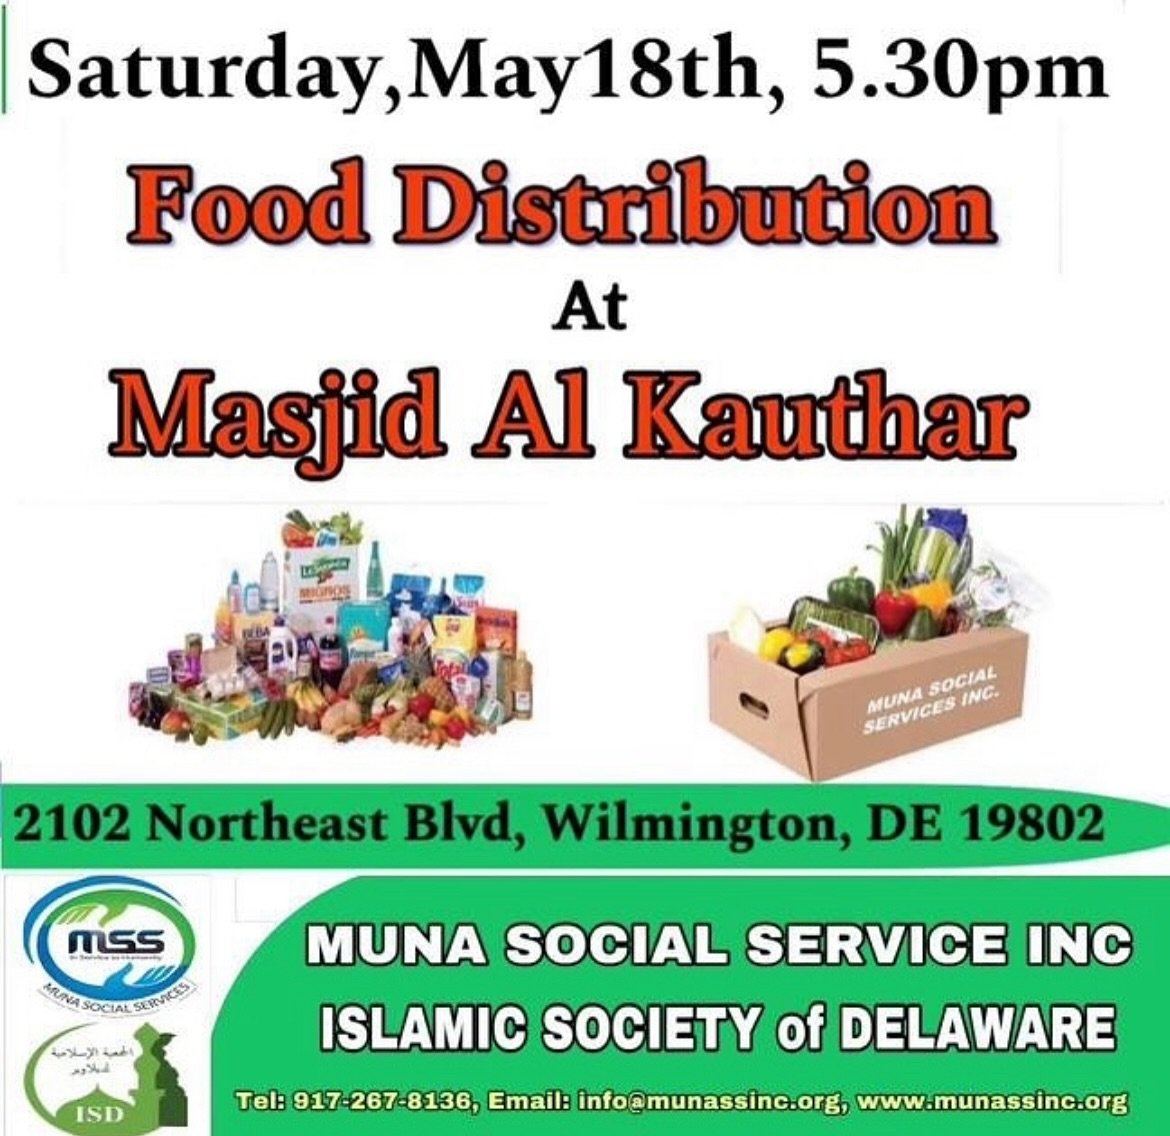 MUNA is coming to Wilmington! Come by the masjid Al kauthar for some fruits and vegetables. 

#freefoodforall #wilmingtondelaware